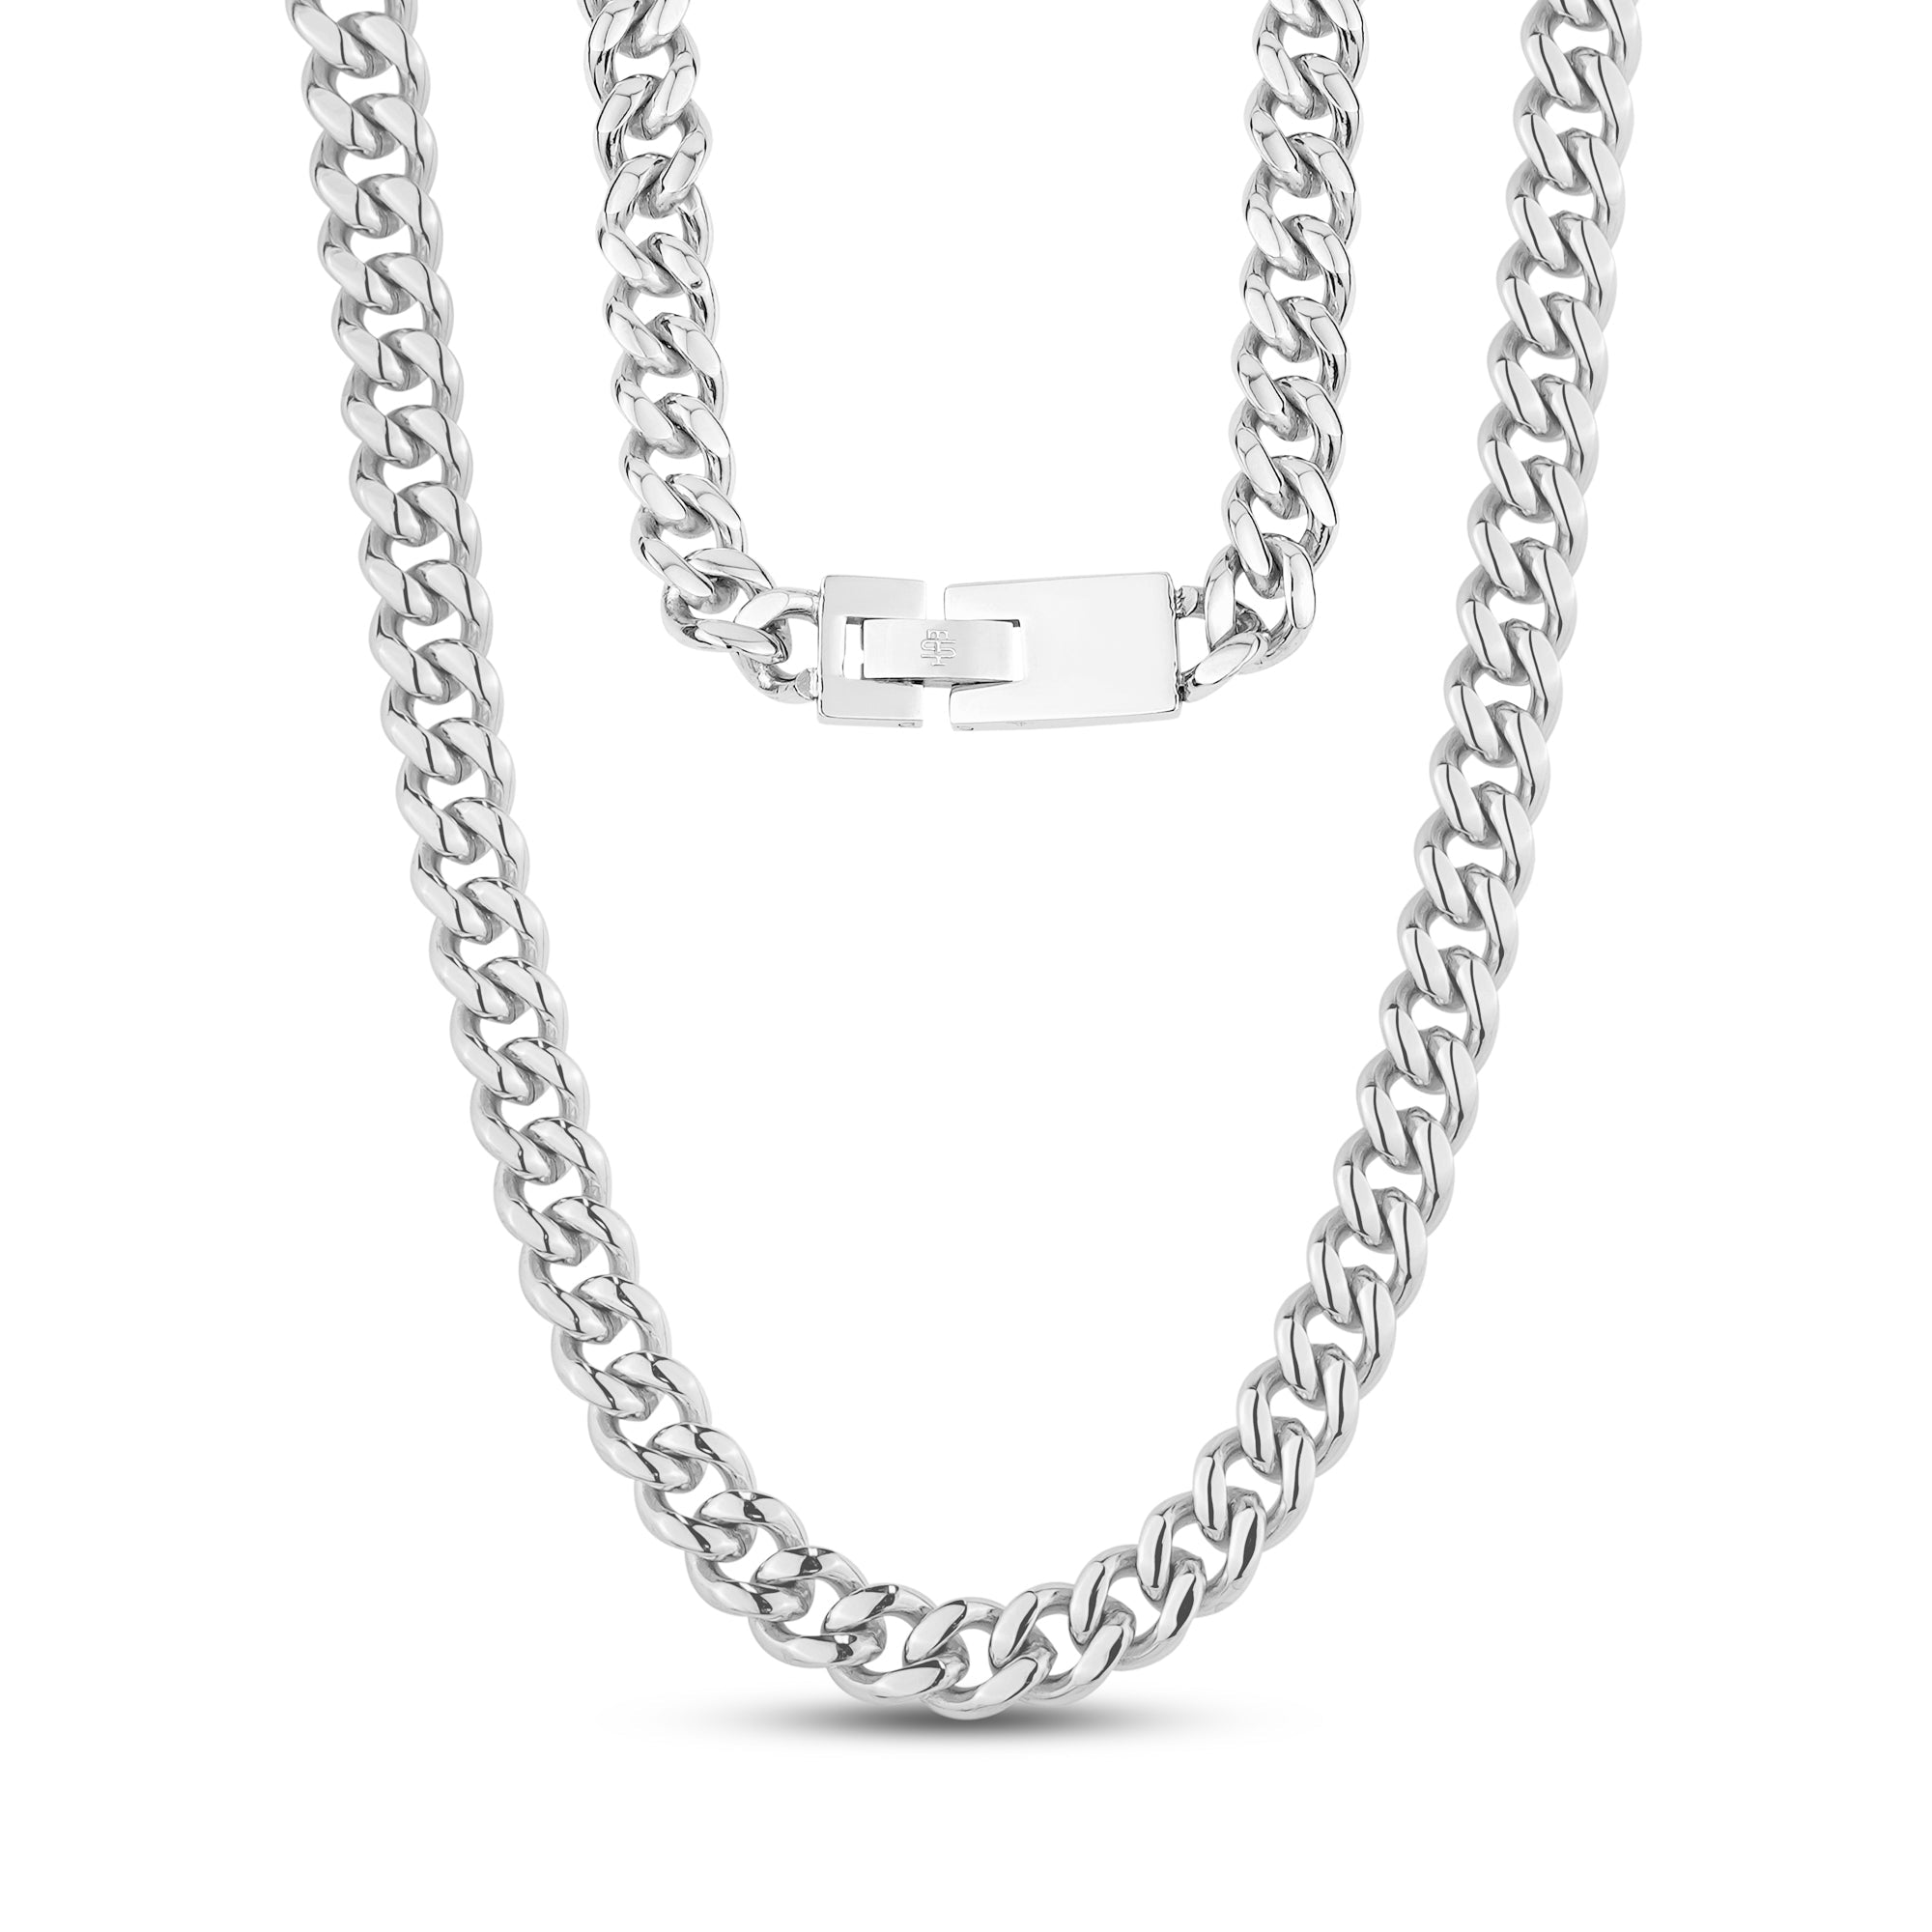 Cuban Link Chain with Names (8mm) - Black Friday Jewelry Deals